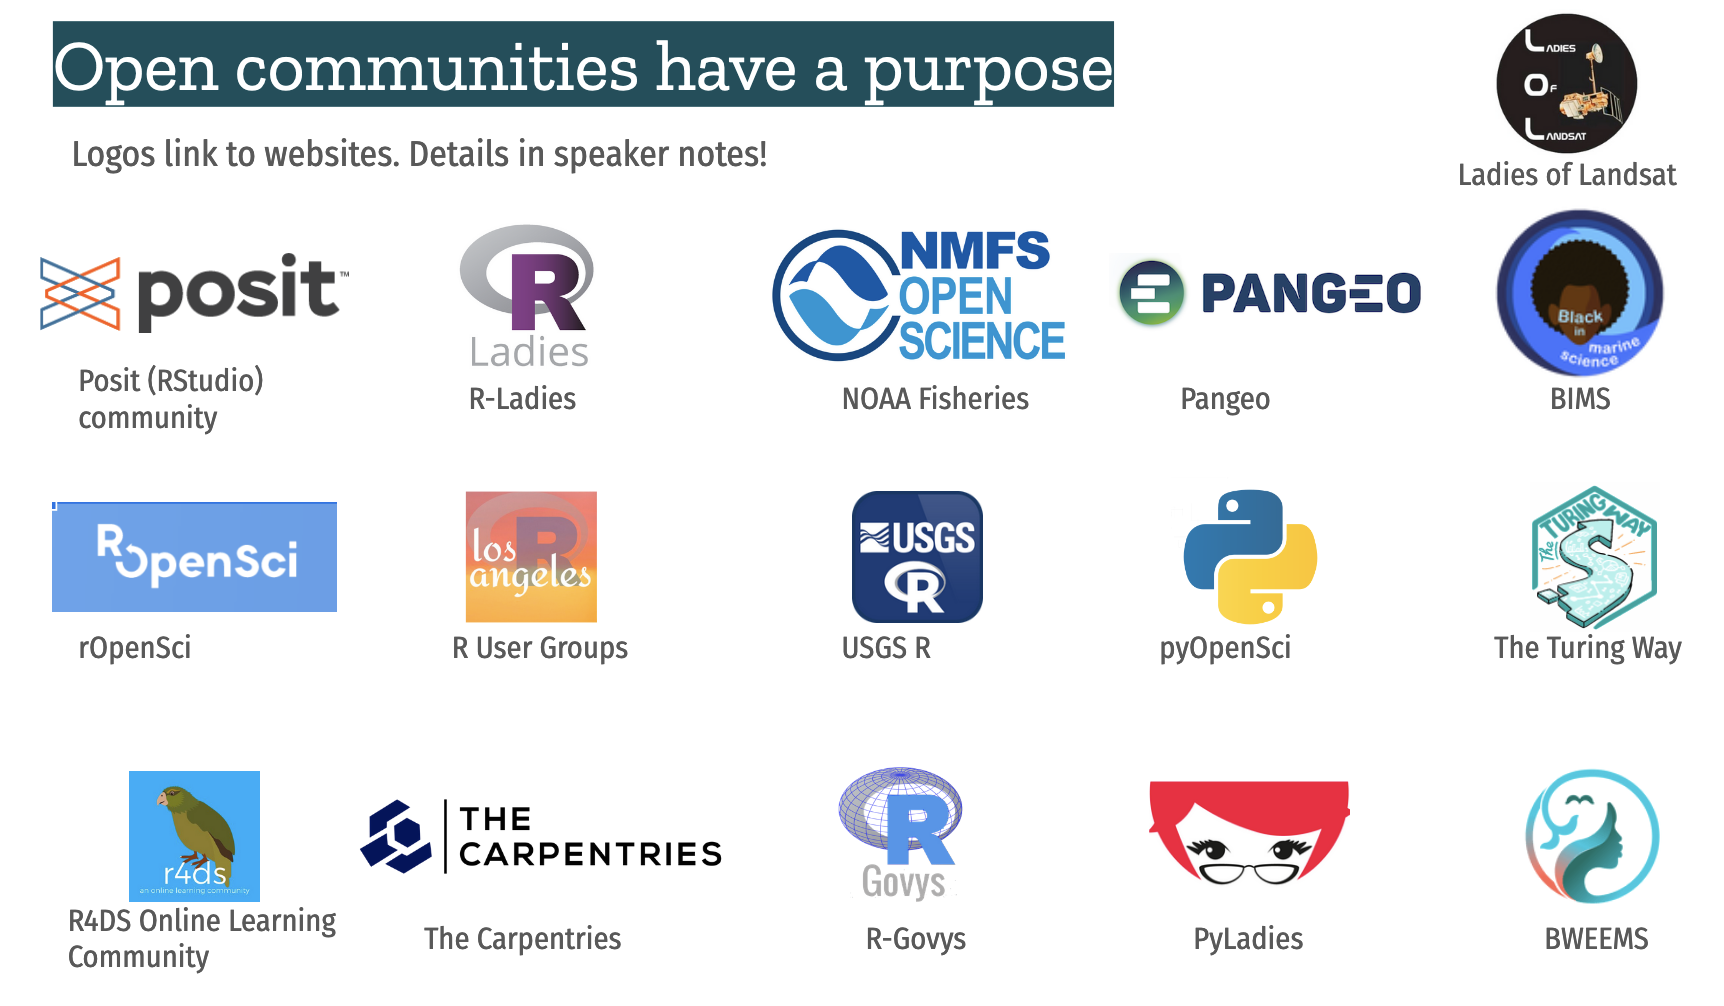 screenshot showing logos from some open communities including a purple R for RLadies, a green and white logo for Pangeo and a blue and black logo for Black in Marine Science